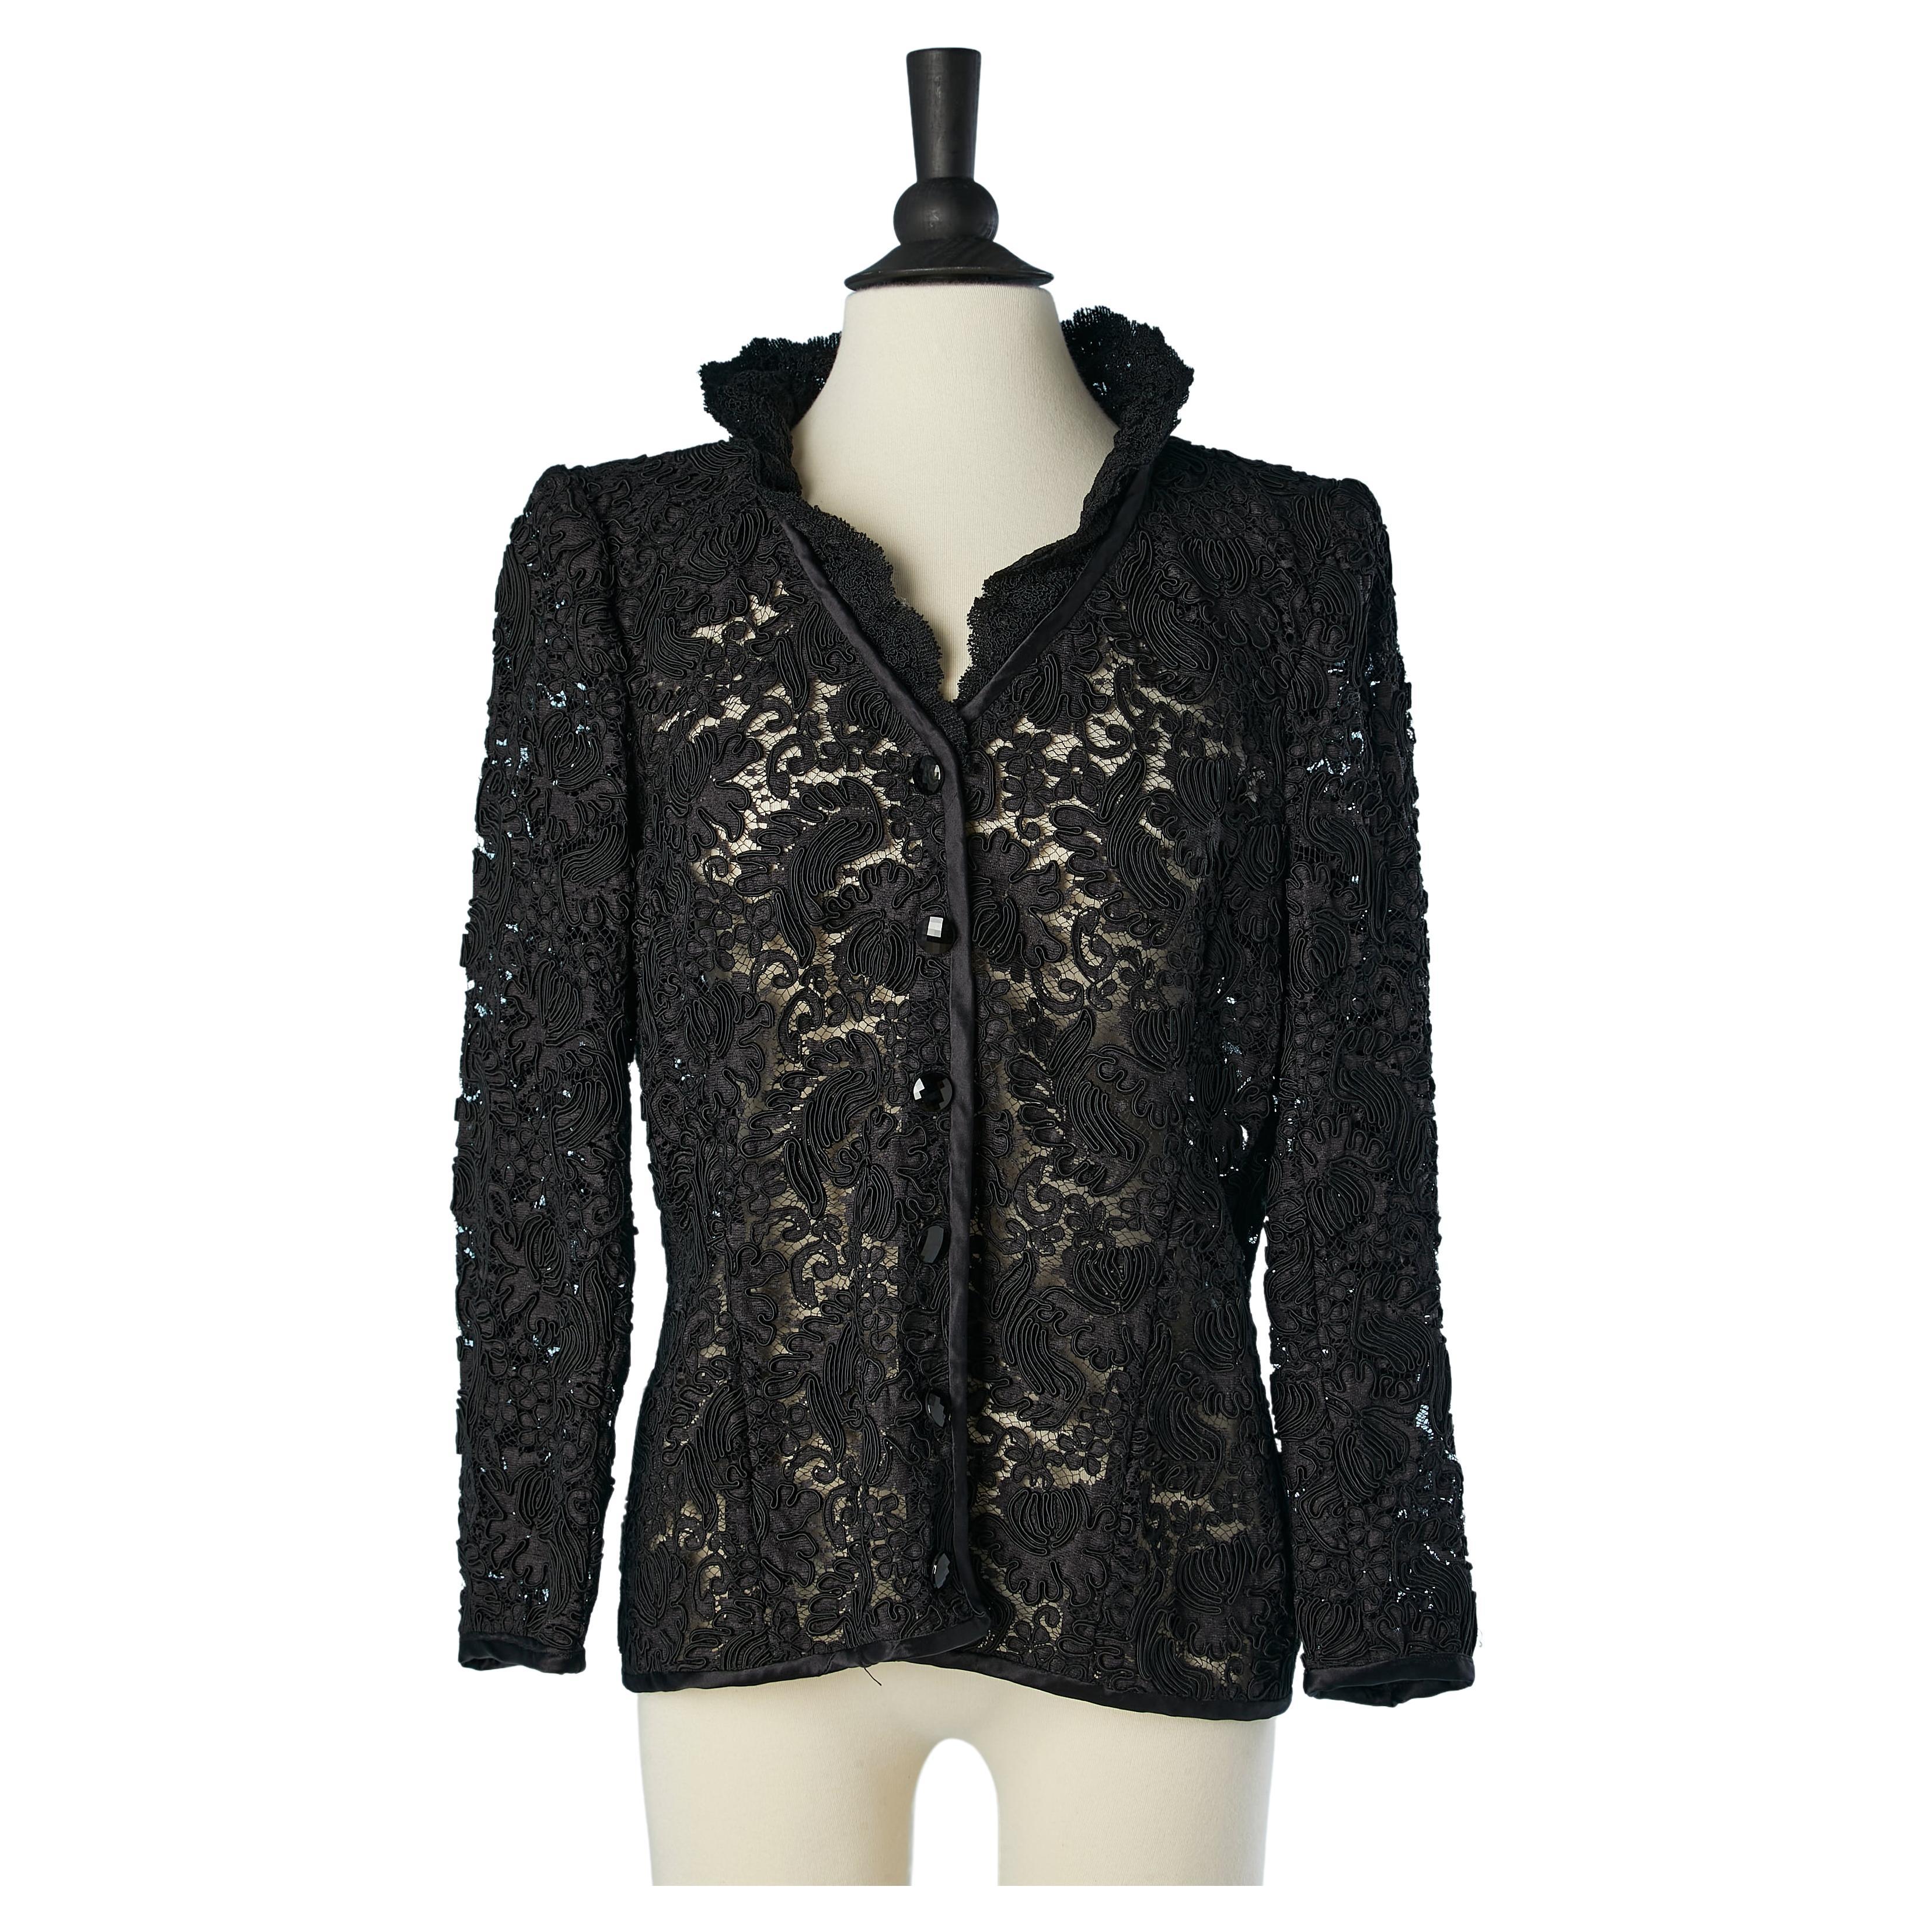  Black guipure evening jacket with ruffle collar YSL Rive Gauche  For Sale